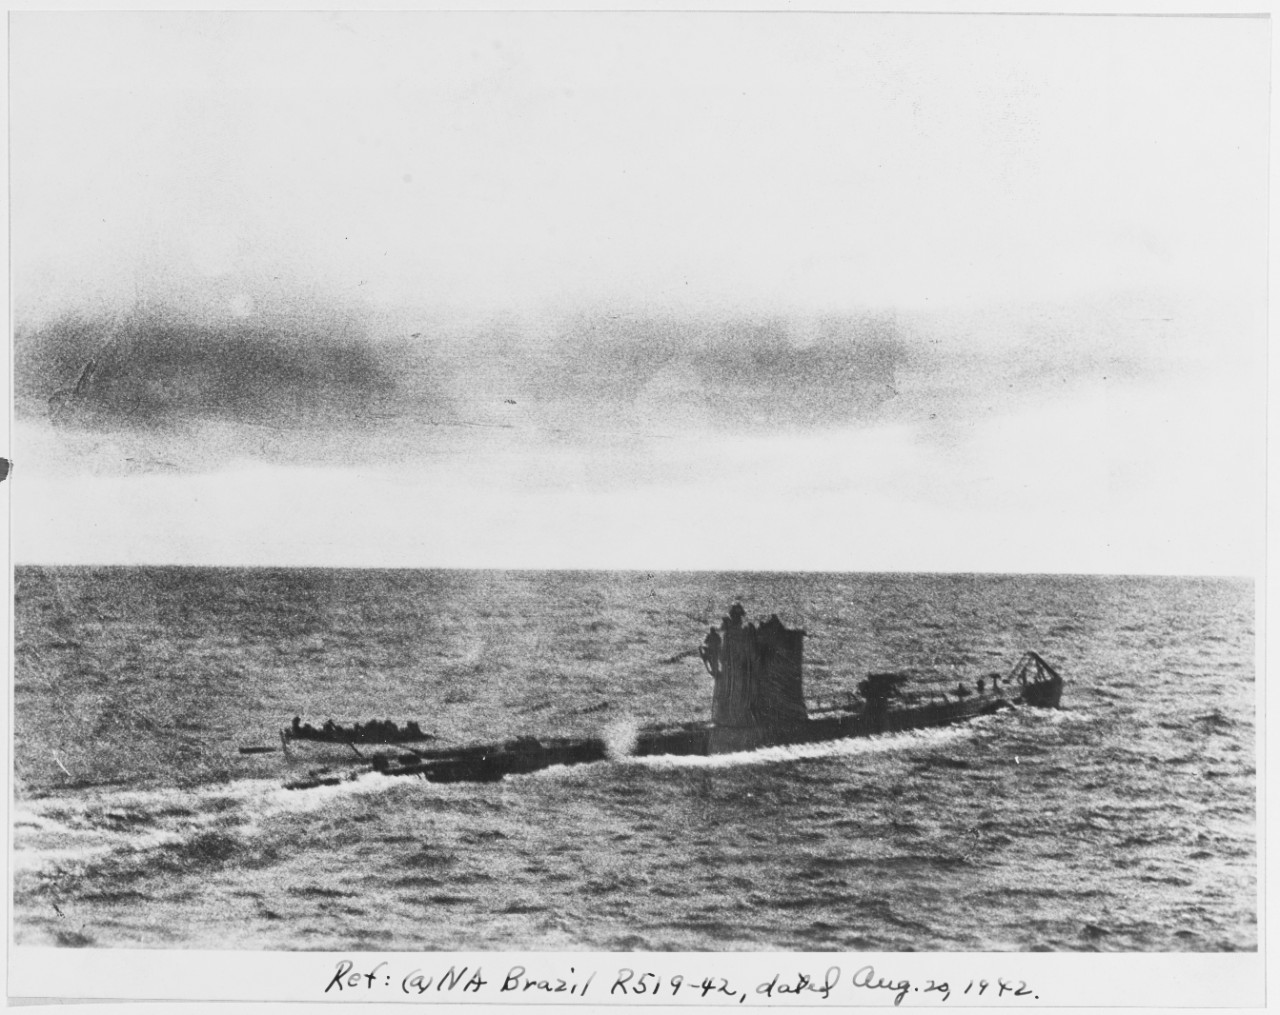 German submarine which stopped Swedish vessel "ETNA" at sea